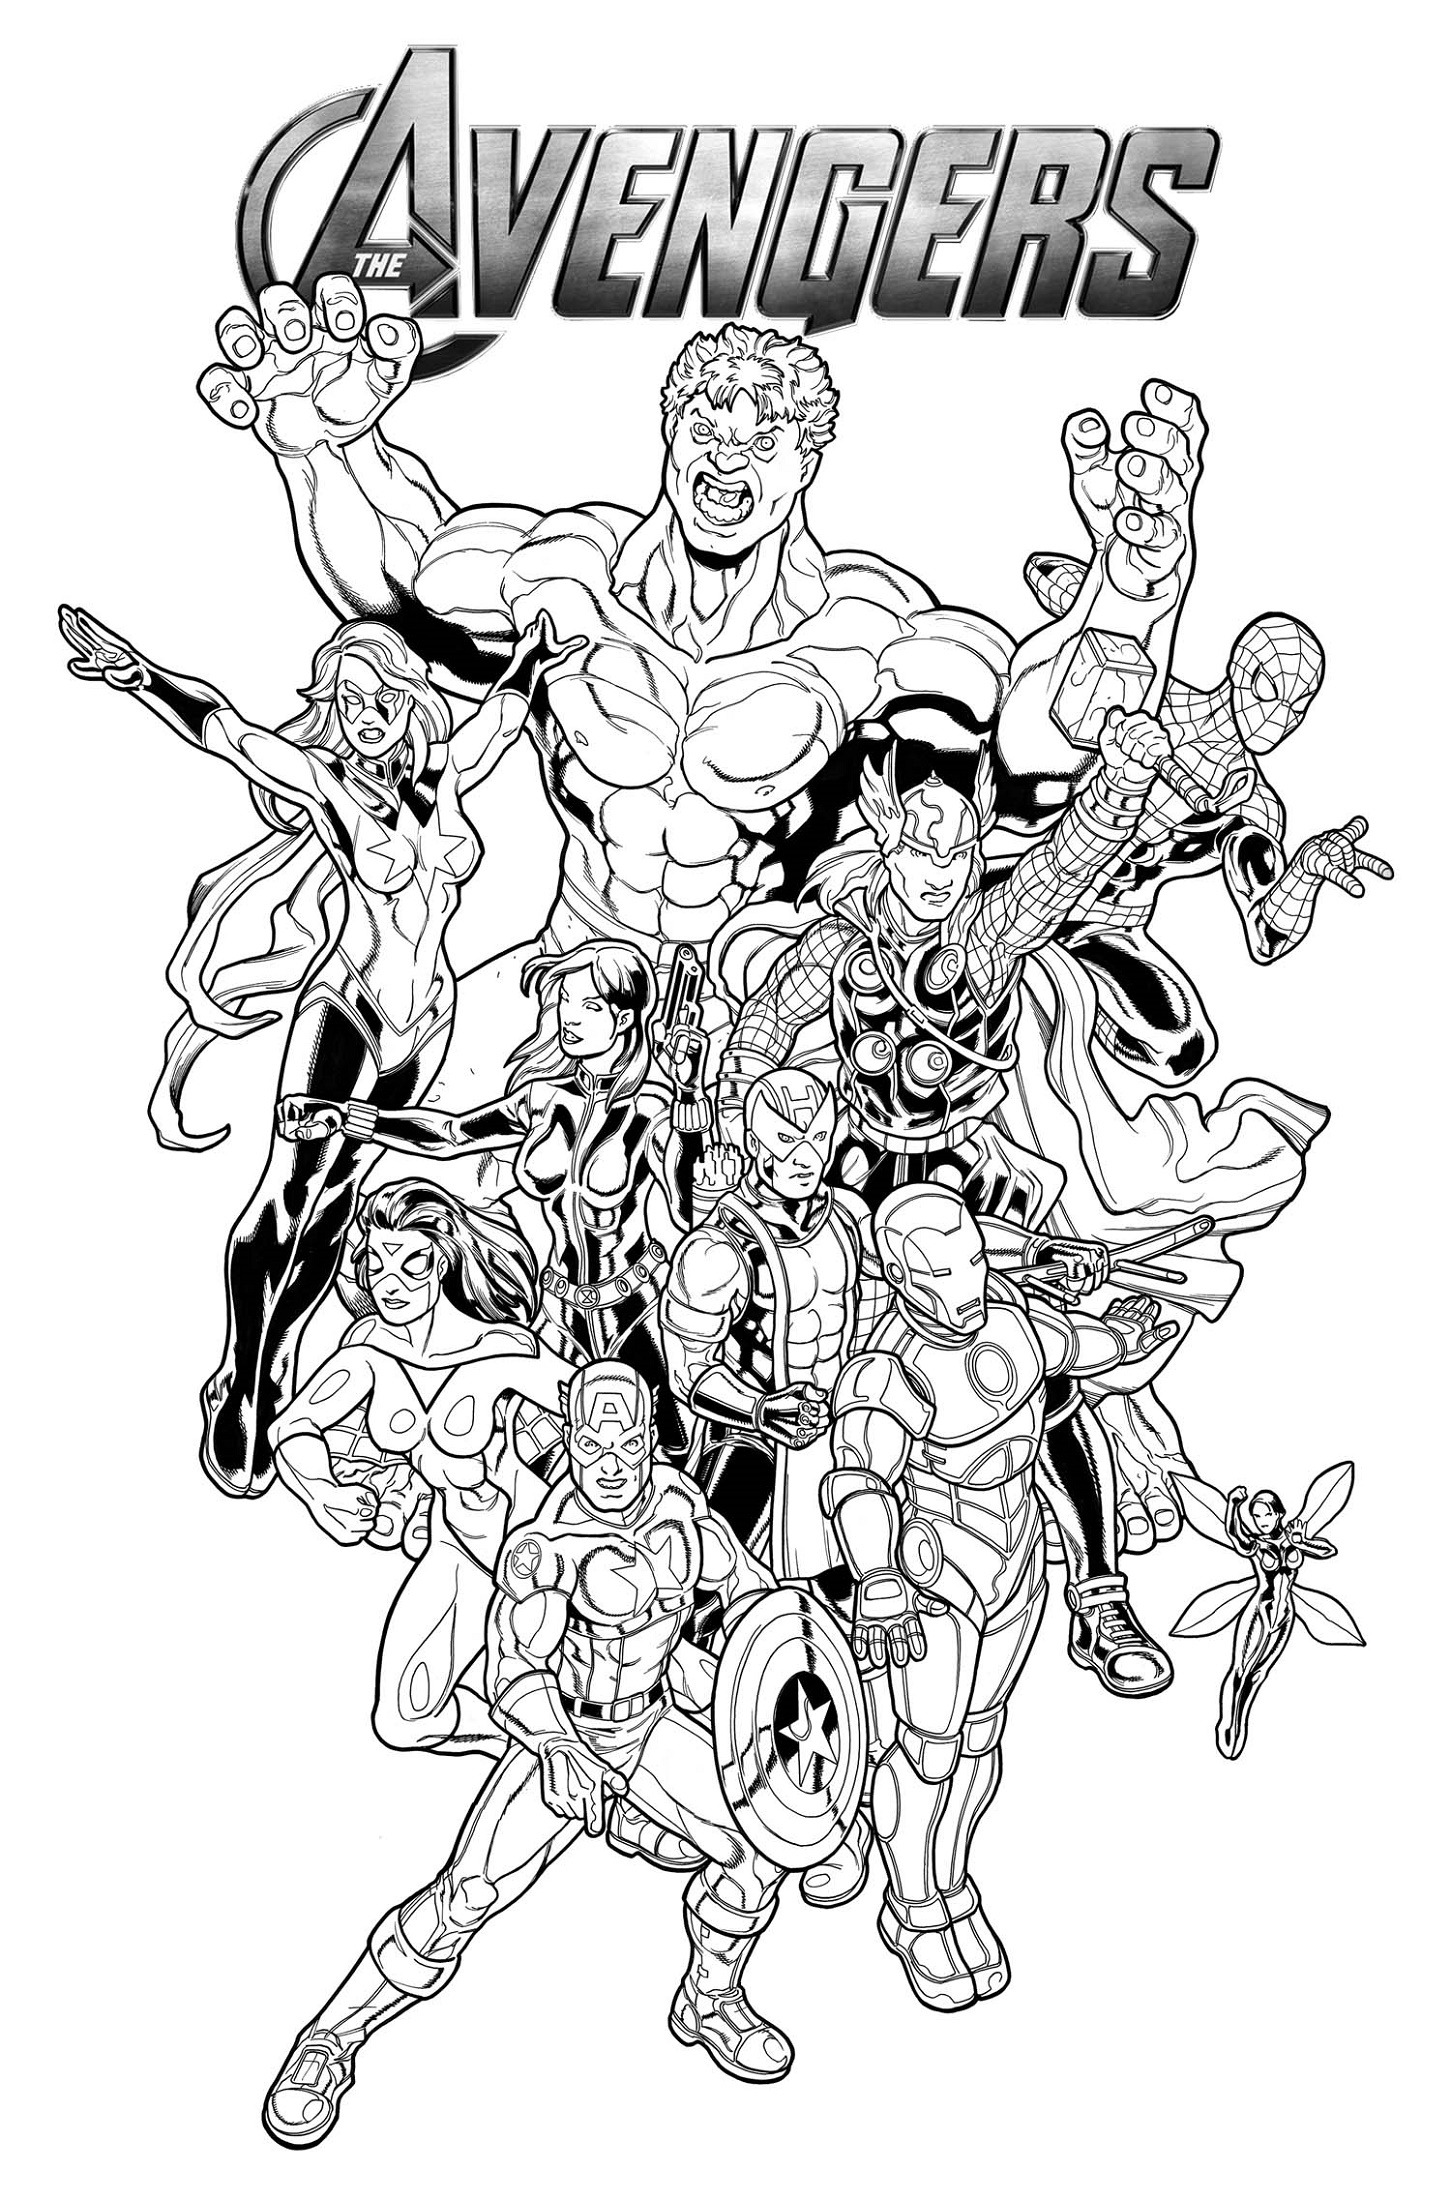 Avengers Coloring Pages from Marvel | K5 Worksheets